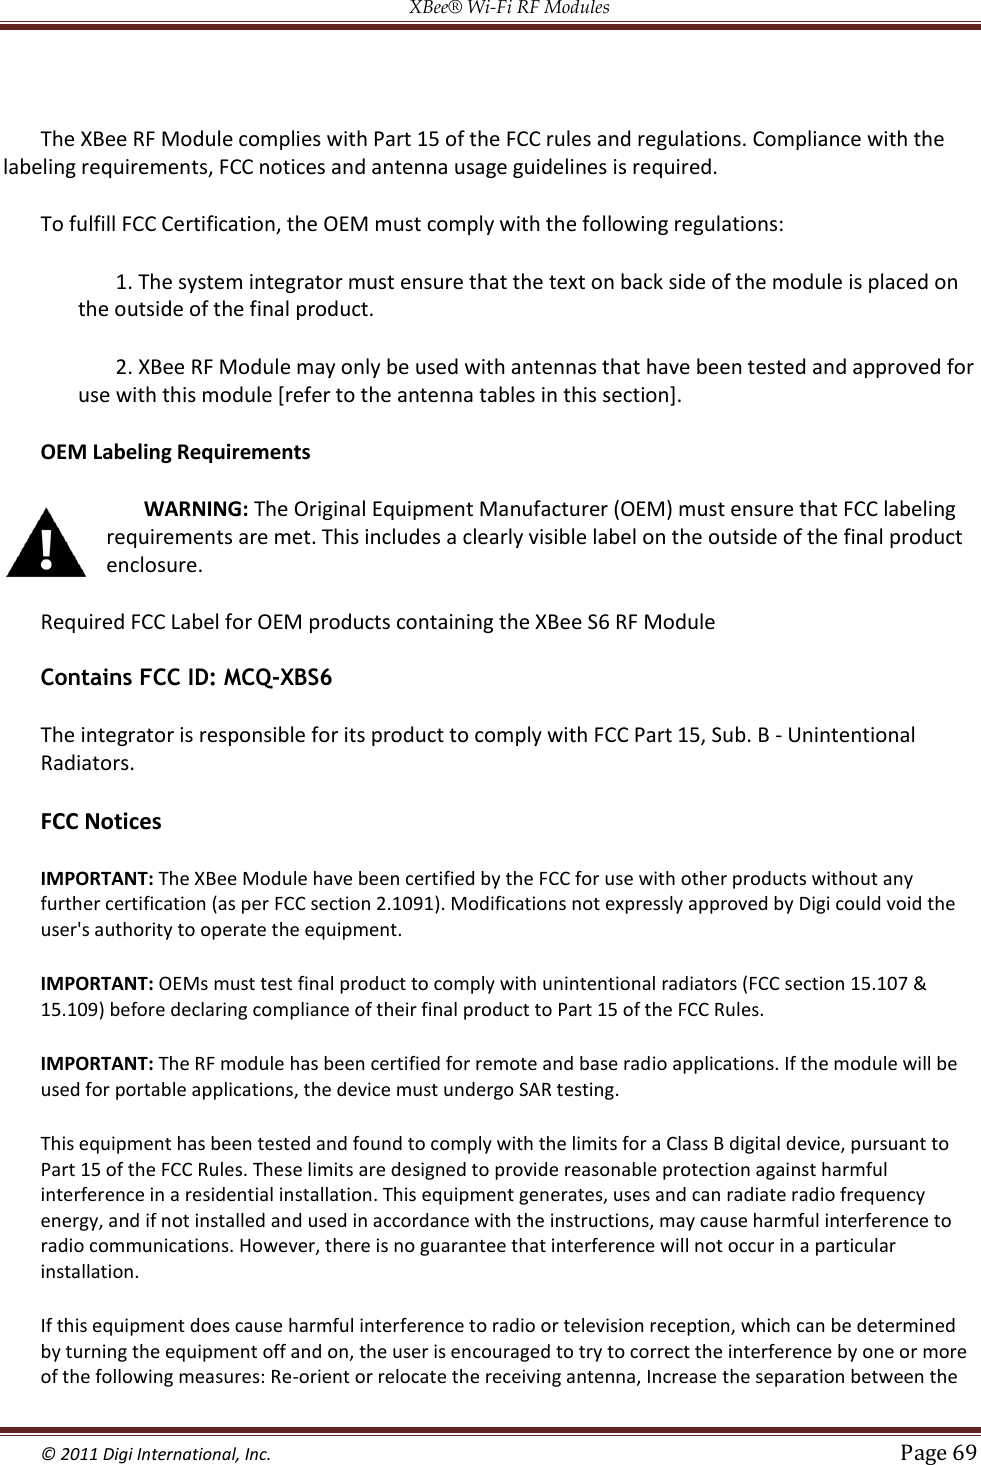 XBee® Wi-Fi RF Modules  © 2011 Digi International, Inc.   Page 69   The XBee RF Module complies with Part 15 of the FCC rules and regulations. Compliance with the labeling requirements, FCC notices and antenna usage guidelines is required. To fulfill FCC Certification, the OEM must comply with the following regulations: 1. The system integrator must ensure that the text on back side of the module is placed on the outside of the final product. 2. XBee RF Module may only be used with antennas that have been tested and approved for use with this module [refer to the antenna tables in this section]. OEM Labeling Requirements WARNING: The Original Equipment Manufacturer (OEM) must ensure that FCC labeling requirements are met. This includes a clearly visible label on the outside of the final product enclosure.  Required FCC Label for OEM products containing the XBee S6 RF Module Contains FCC ID: MCQ-XBS6 The integrator is responsible for its product to comply with FCC Part 15, Sub. B - Unintentional Radiators.  FCC Notices IMPORTANT: The XBee Module have been certified by the FCC for use with other products without any further certification (as per FCC section 2.1091). Modifications not expressly approved by Digi could void the user&apos;s authority to operate the equipment. IMPORTANT: OEMs must test final product to comply with unintentional radiators (FCC section 15.107 &amp; 15.109) before declaring compliance of their final product to Part 15 of the FCC Rules. IMPORTANT: The RF module has been certified for remote and base radio applications. If the module will be used for portable applications, the device must undergo SAR testing. This equipment has been tested and found to comply with the limits for a Class B digital device, pursuant to Part 15 of the FCC Rules. These limits are designed to provide reasonable protection against harmful interference in a residential installation. This equipment generates, uses and can radiate radio frequency energy, and if not installed and used in accordance with the instructions, may cause harmful interference to radio communications. However, there is no guarantee that interference will not occur in a particular installation. If this equipment does cause harmful interference to radio or television reception, which can be determined by turning the equipment off and on, the user is encouraged to try to correct the interference by one or more of the following measures: Re-orient or relocate the receiving antenna, Increase the separation between the 